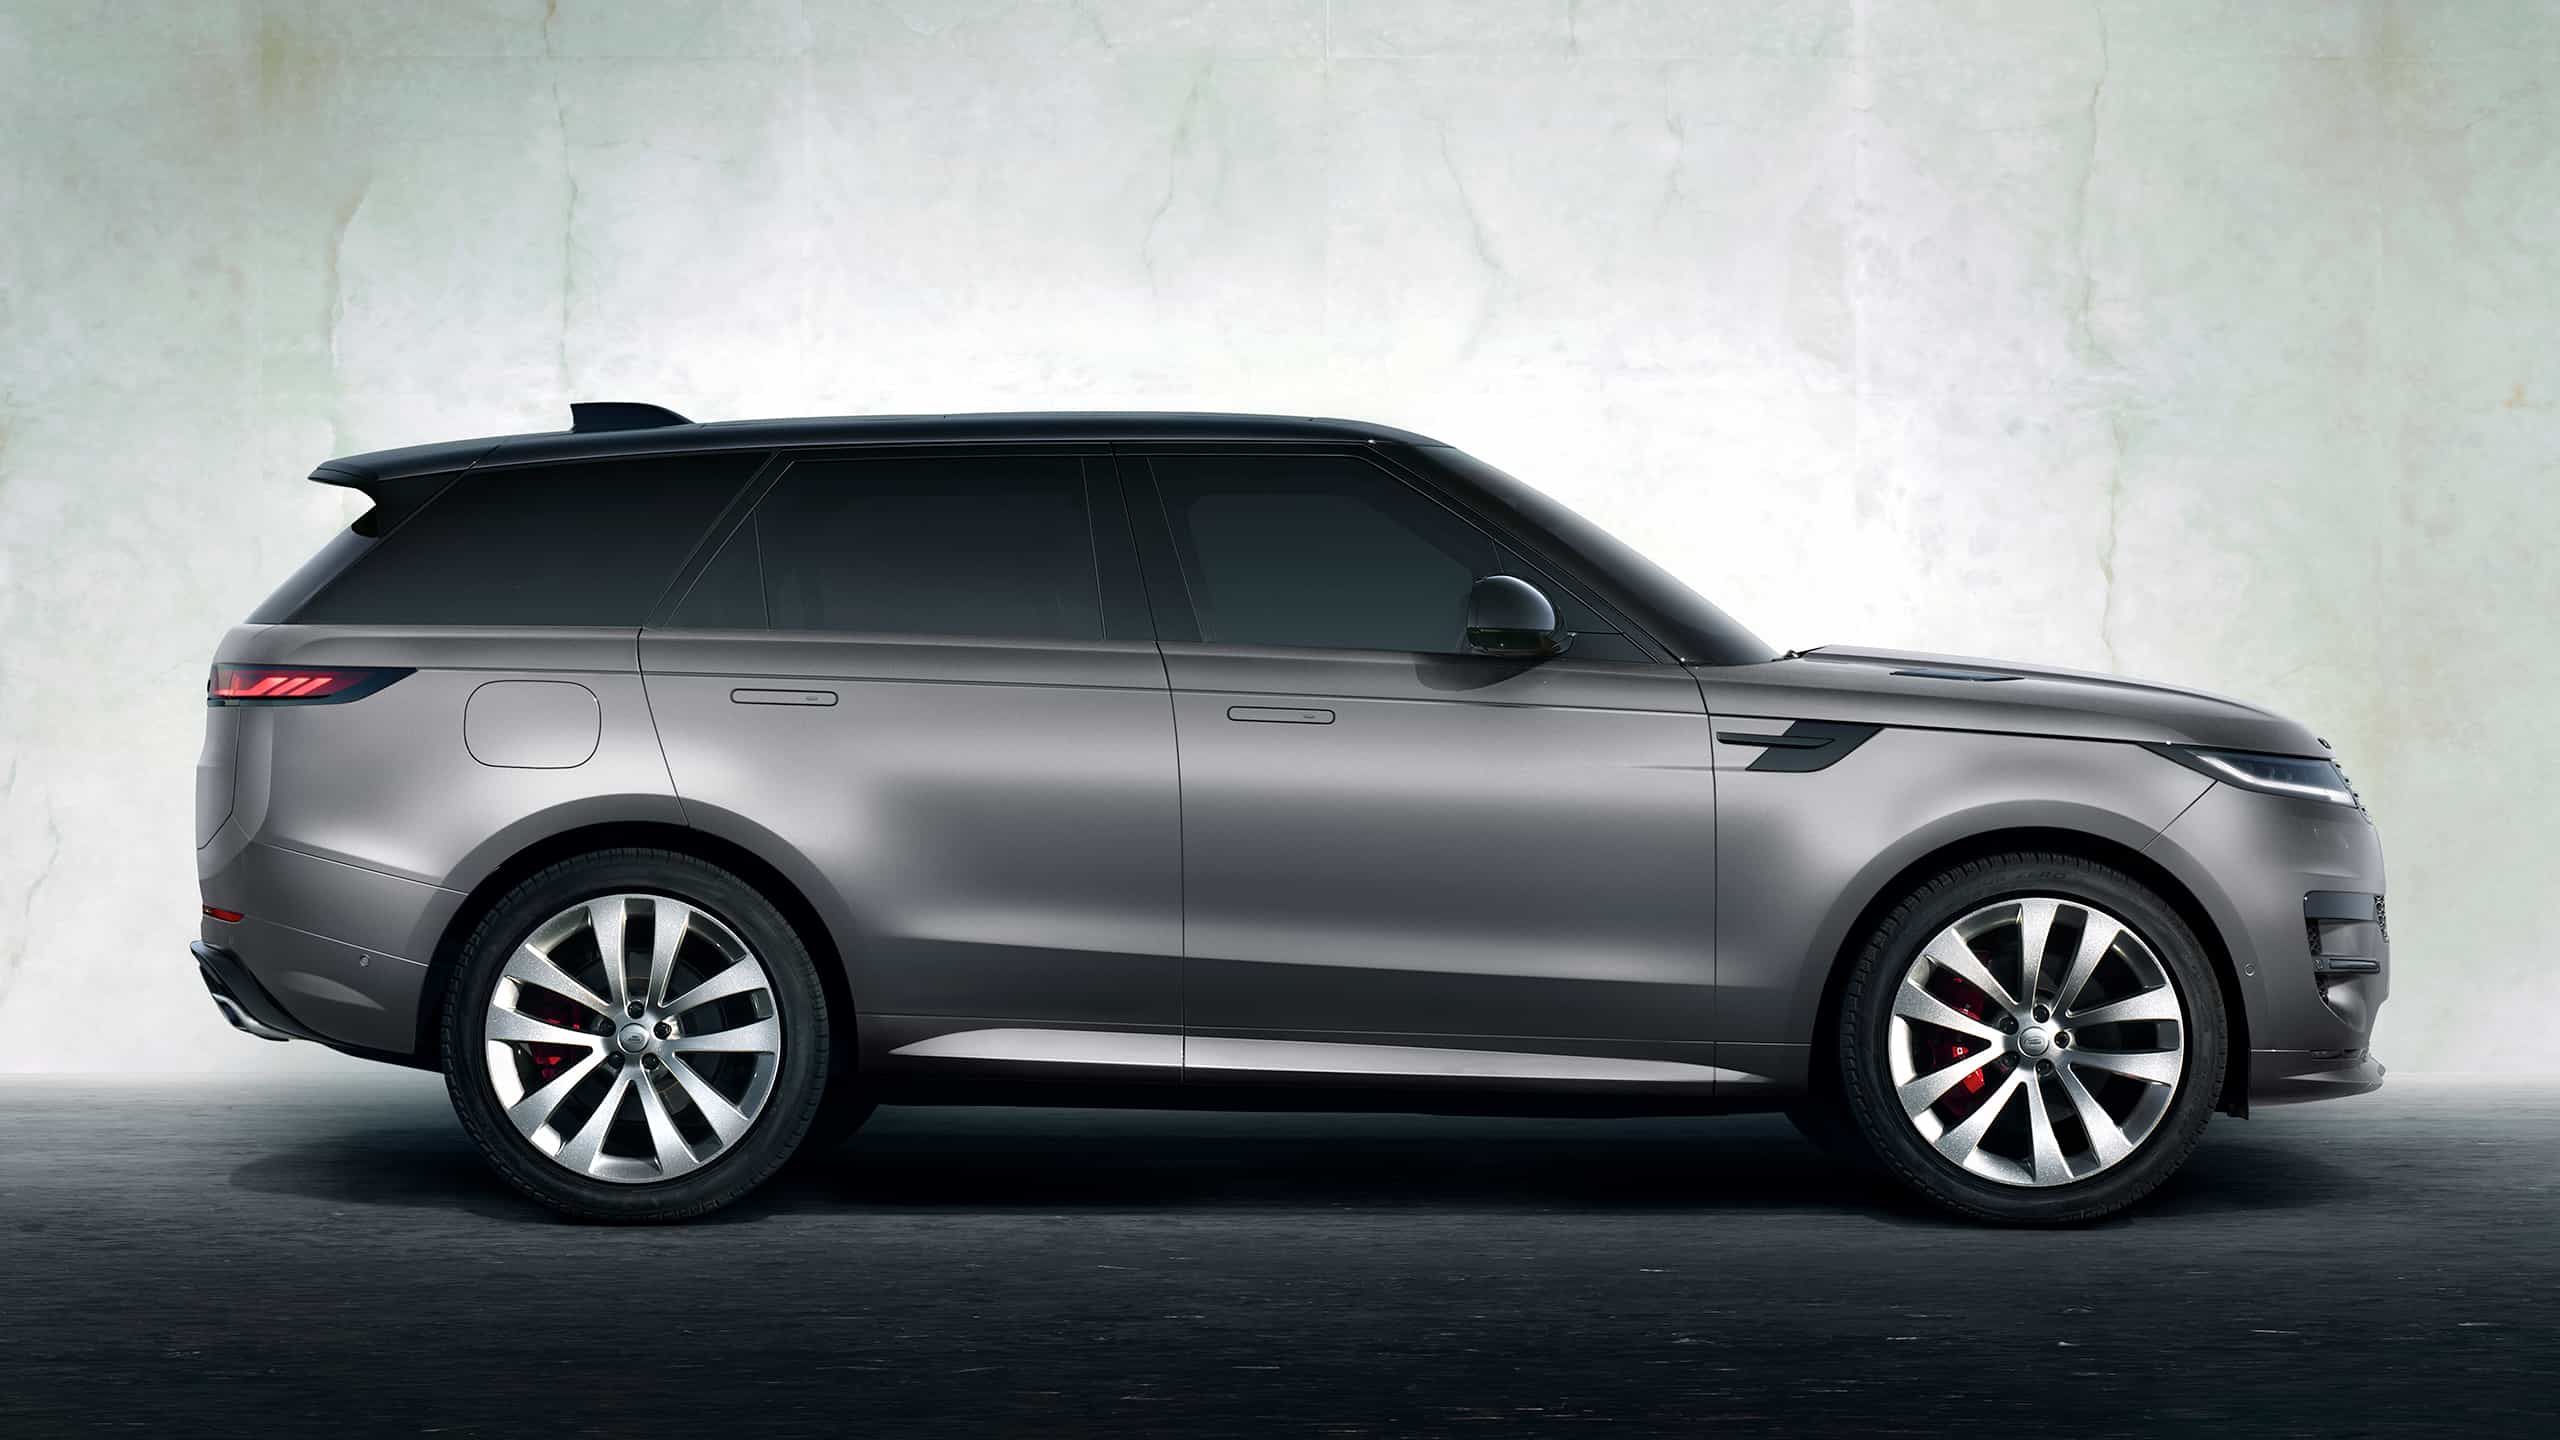 The 2023 Range Rover: Redesigned and Ready for Adventure